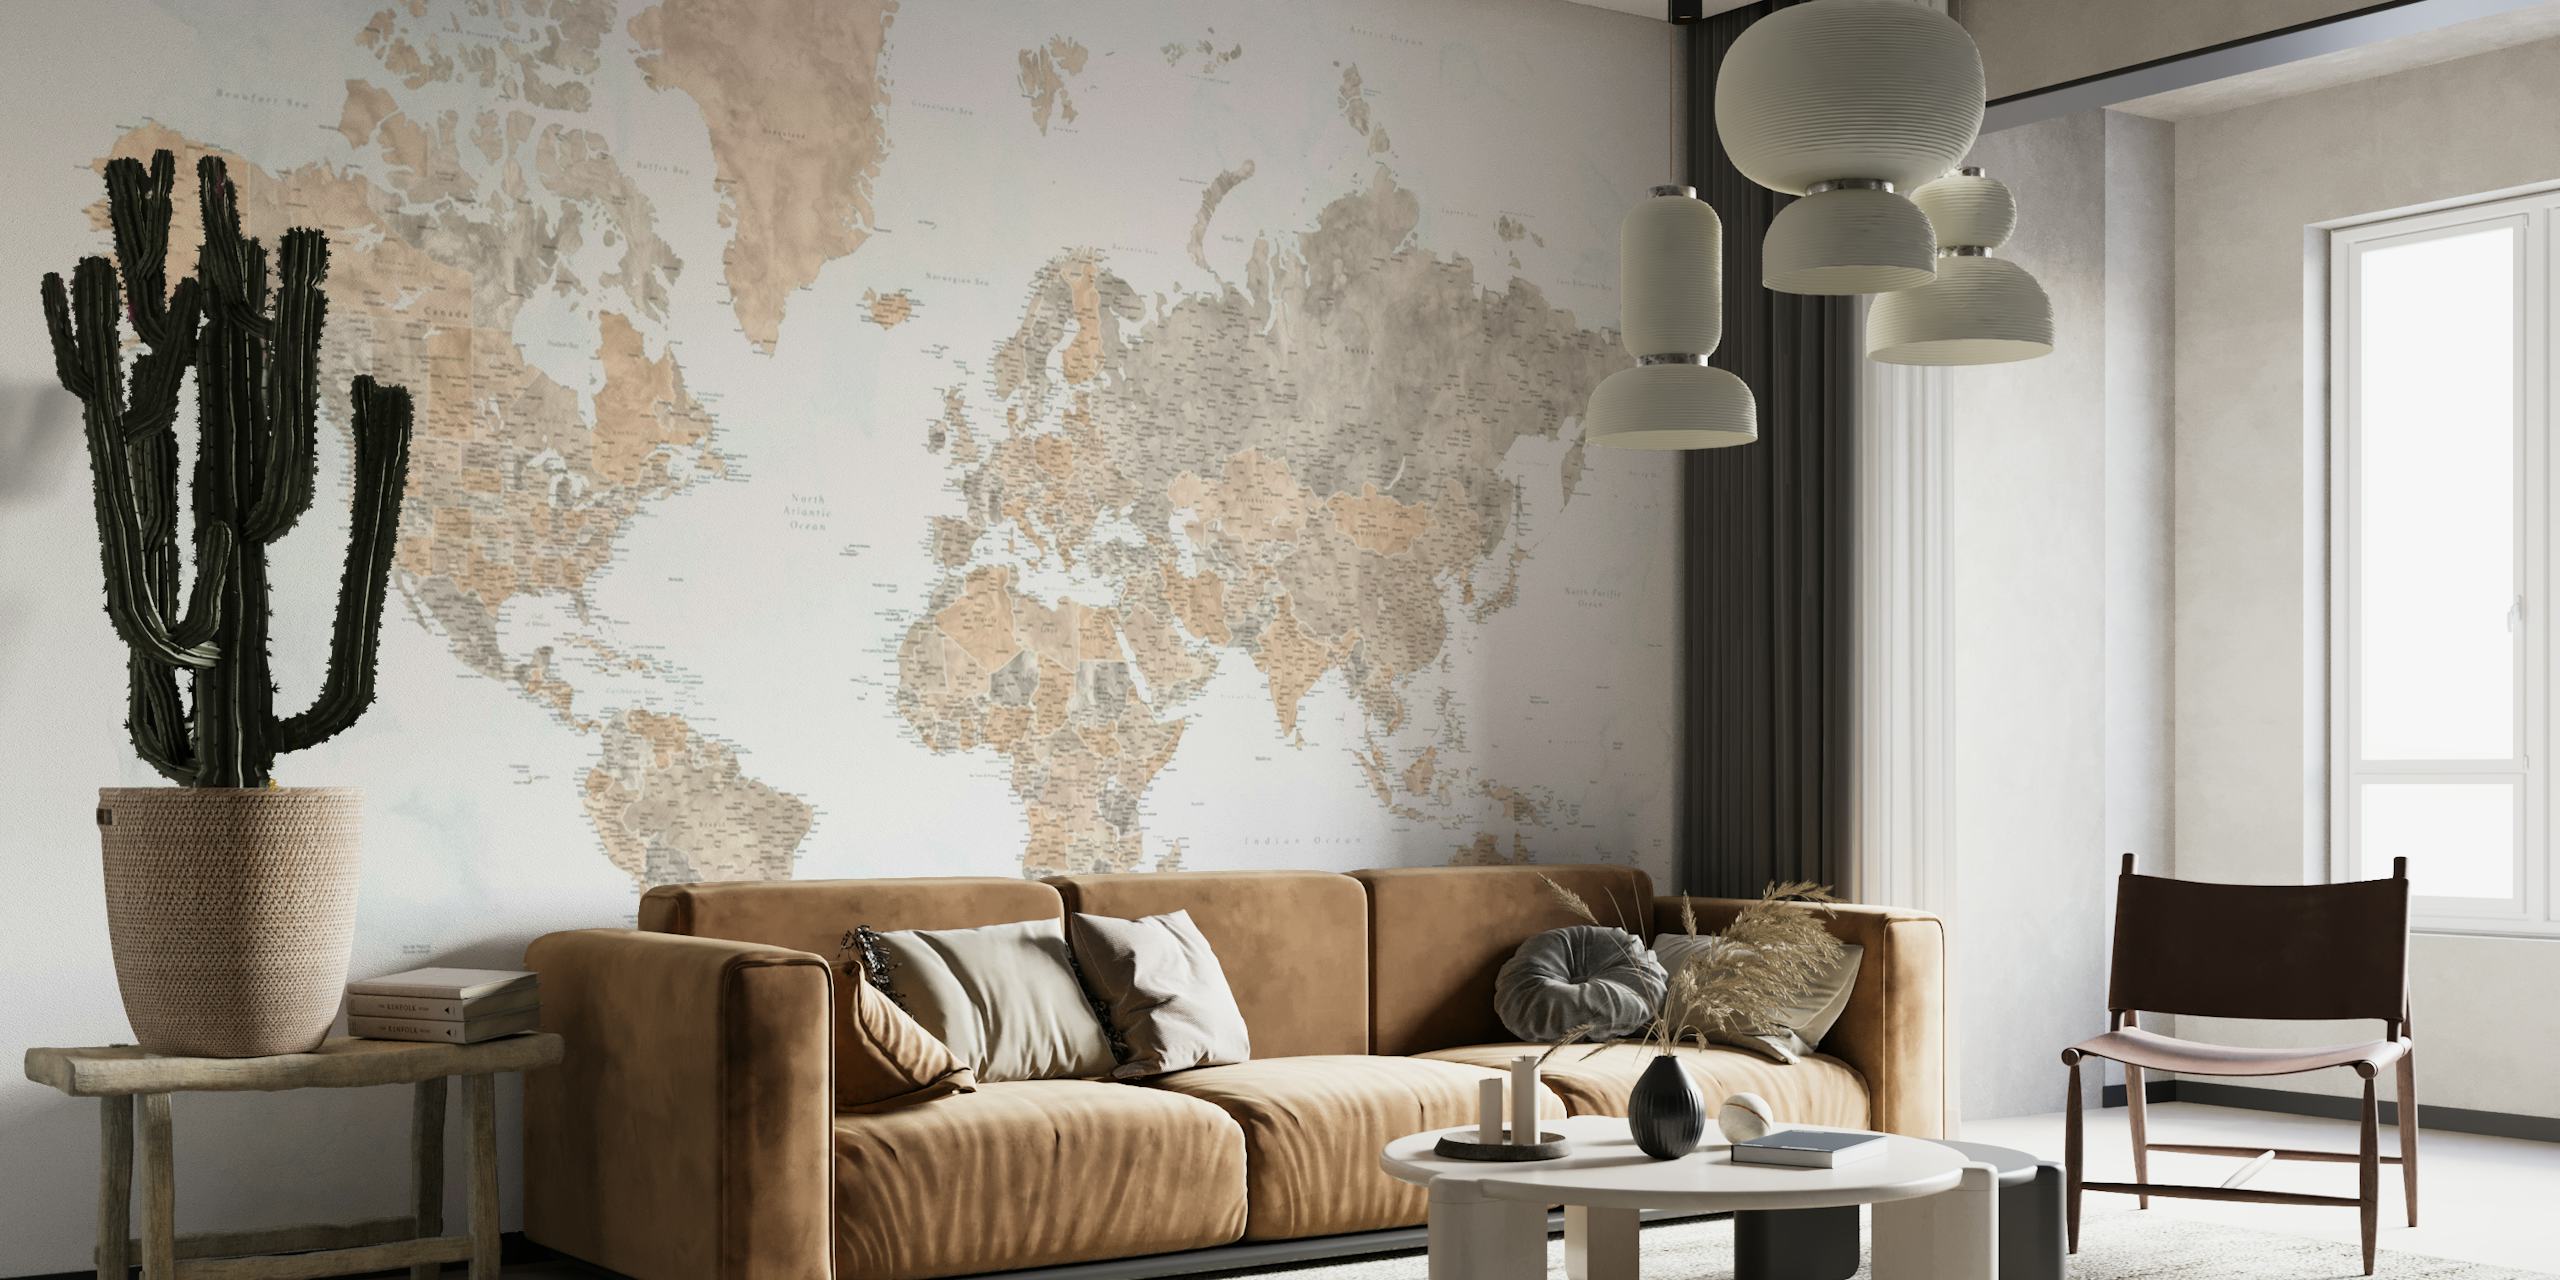 high-detail vintage world map wall mural in earth tones